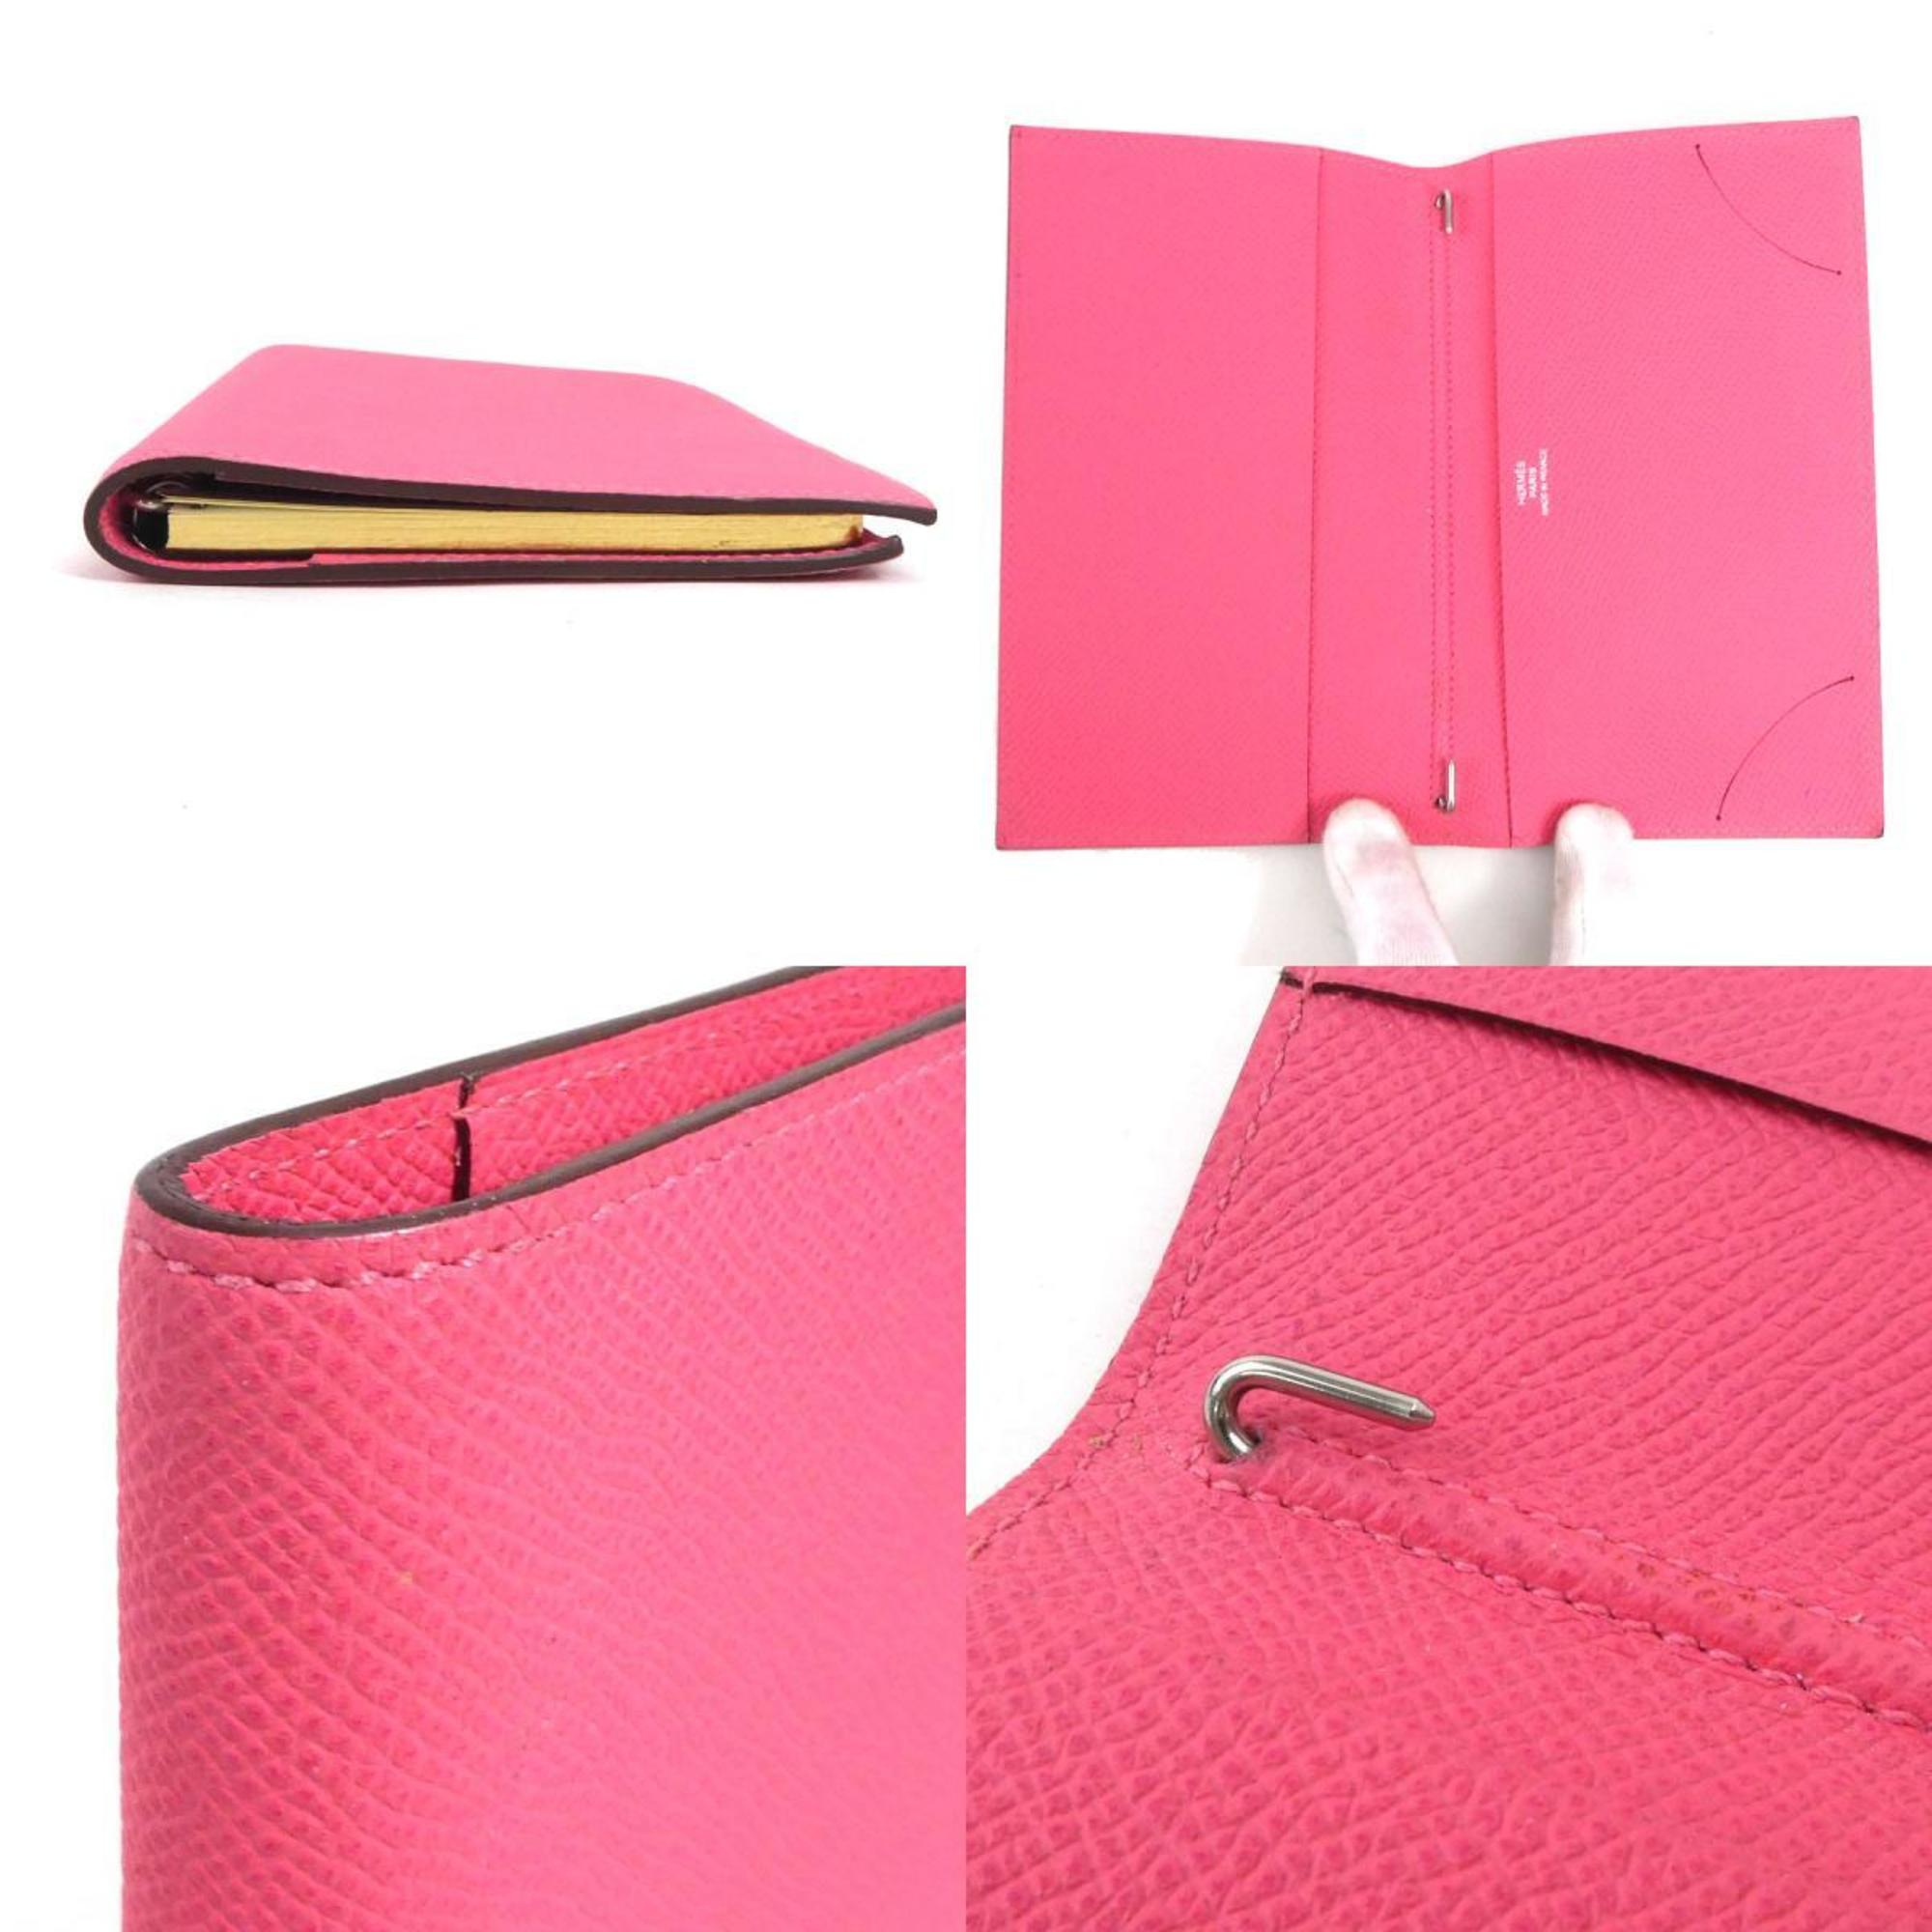 Hermes Notebook Cover Leather Pink Ladies